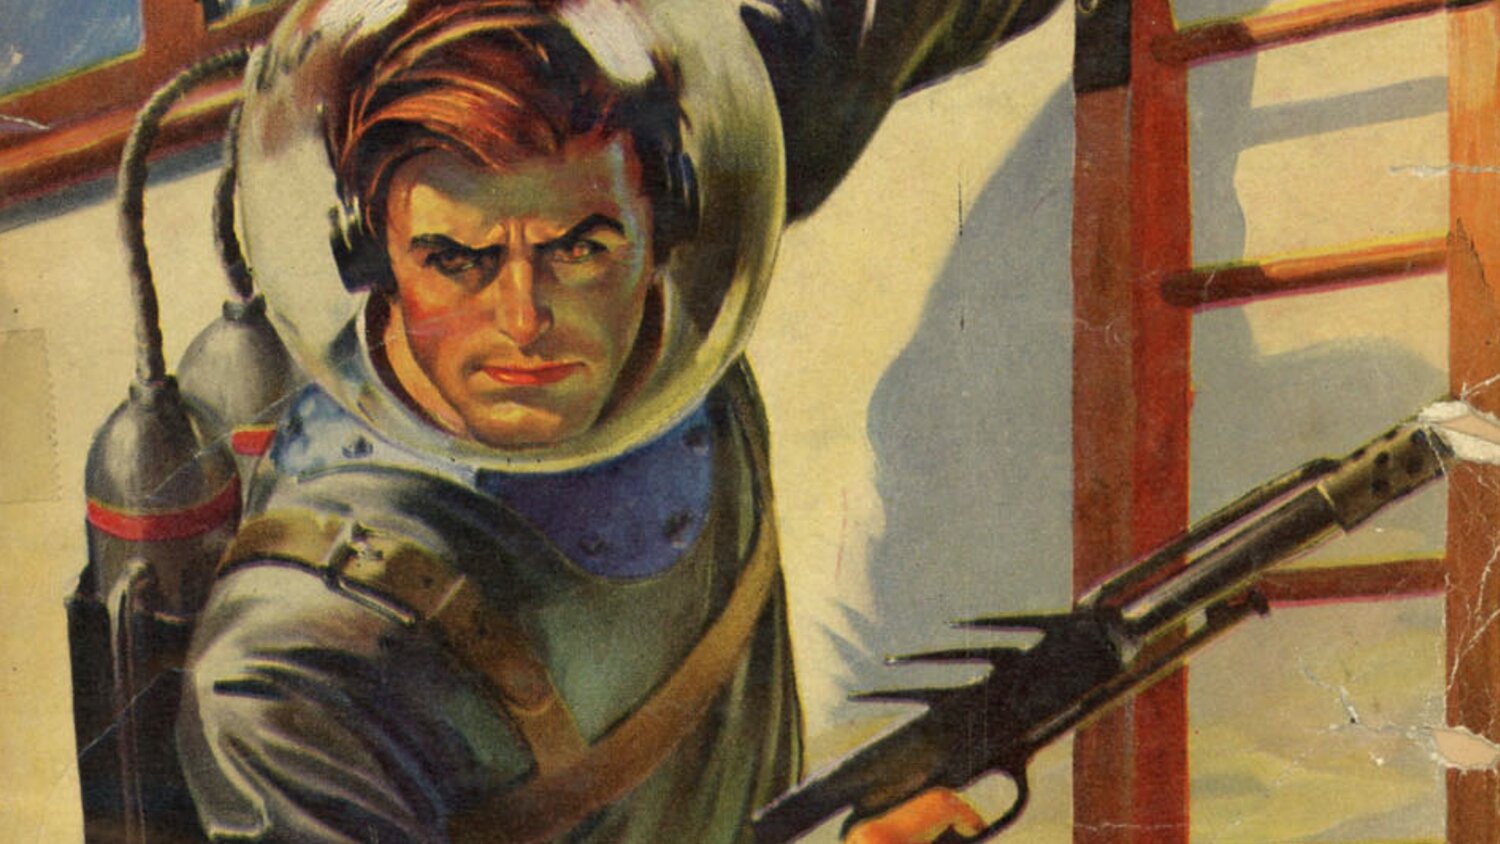 DOC SAVAGE is Now Being Developed as an Adventure TV Series — GeekTyrant